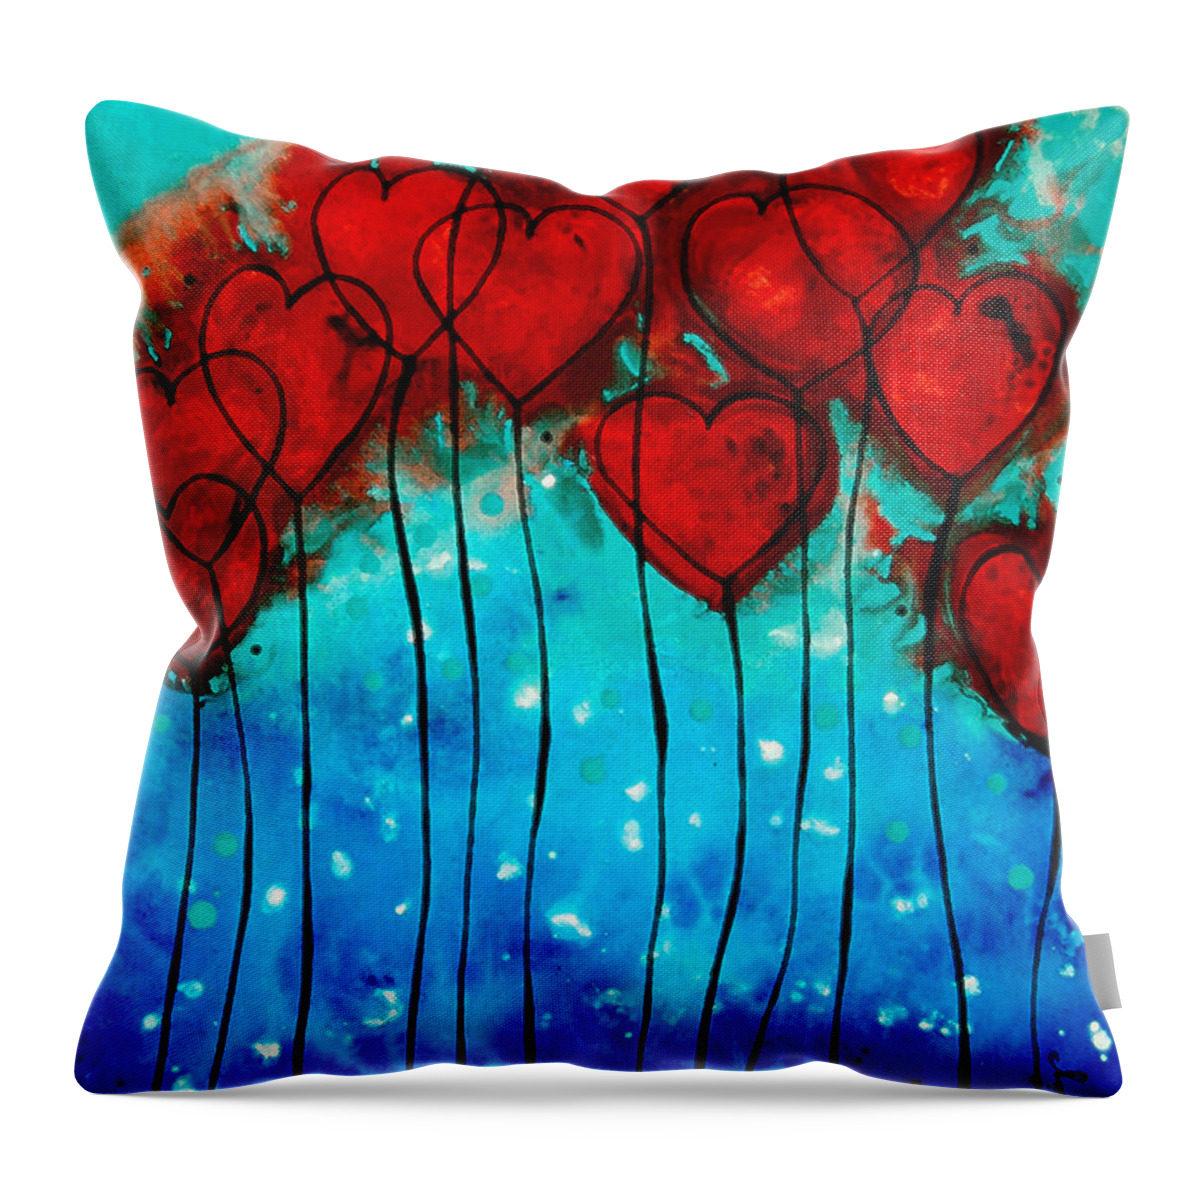 Red Throw Pillow featuring the painting Hearts on Fire - Romantic Art By Sharon Cummings by Sharon Cummings